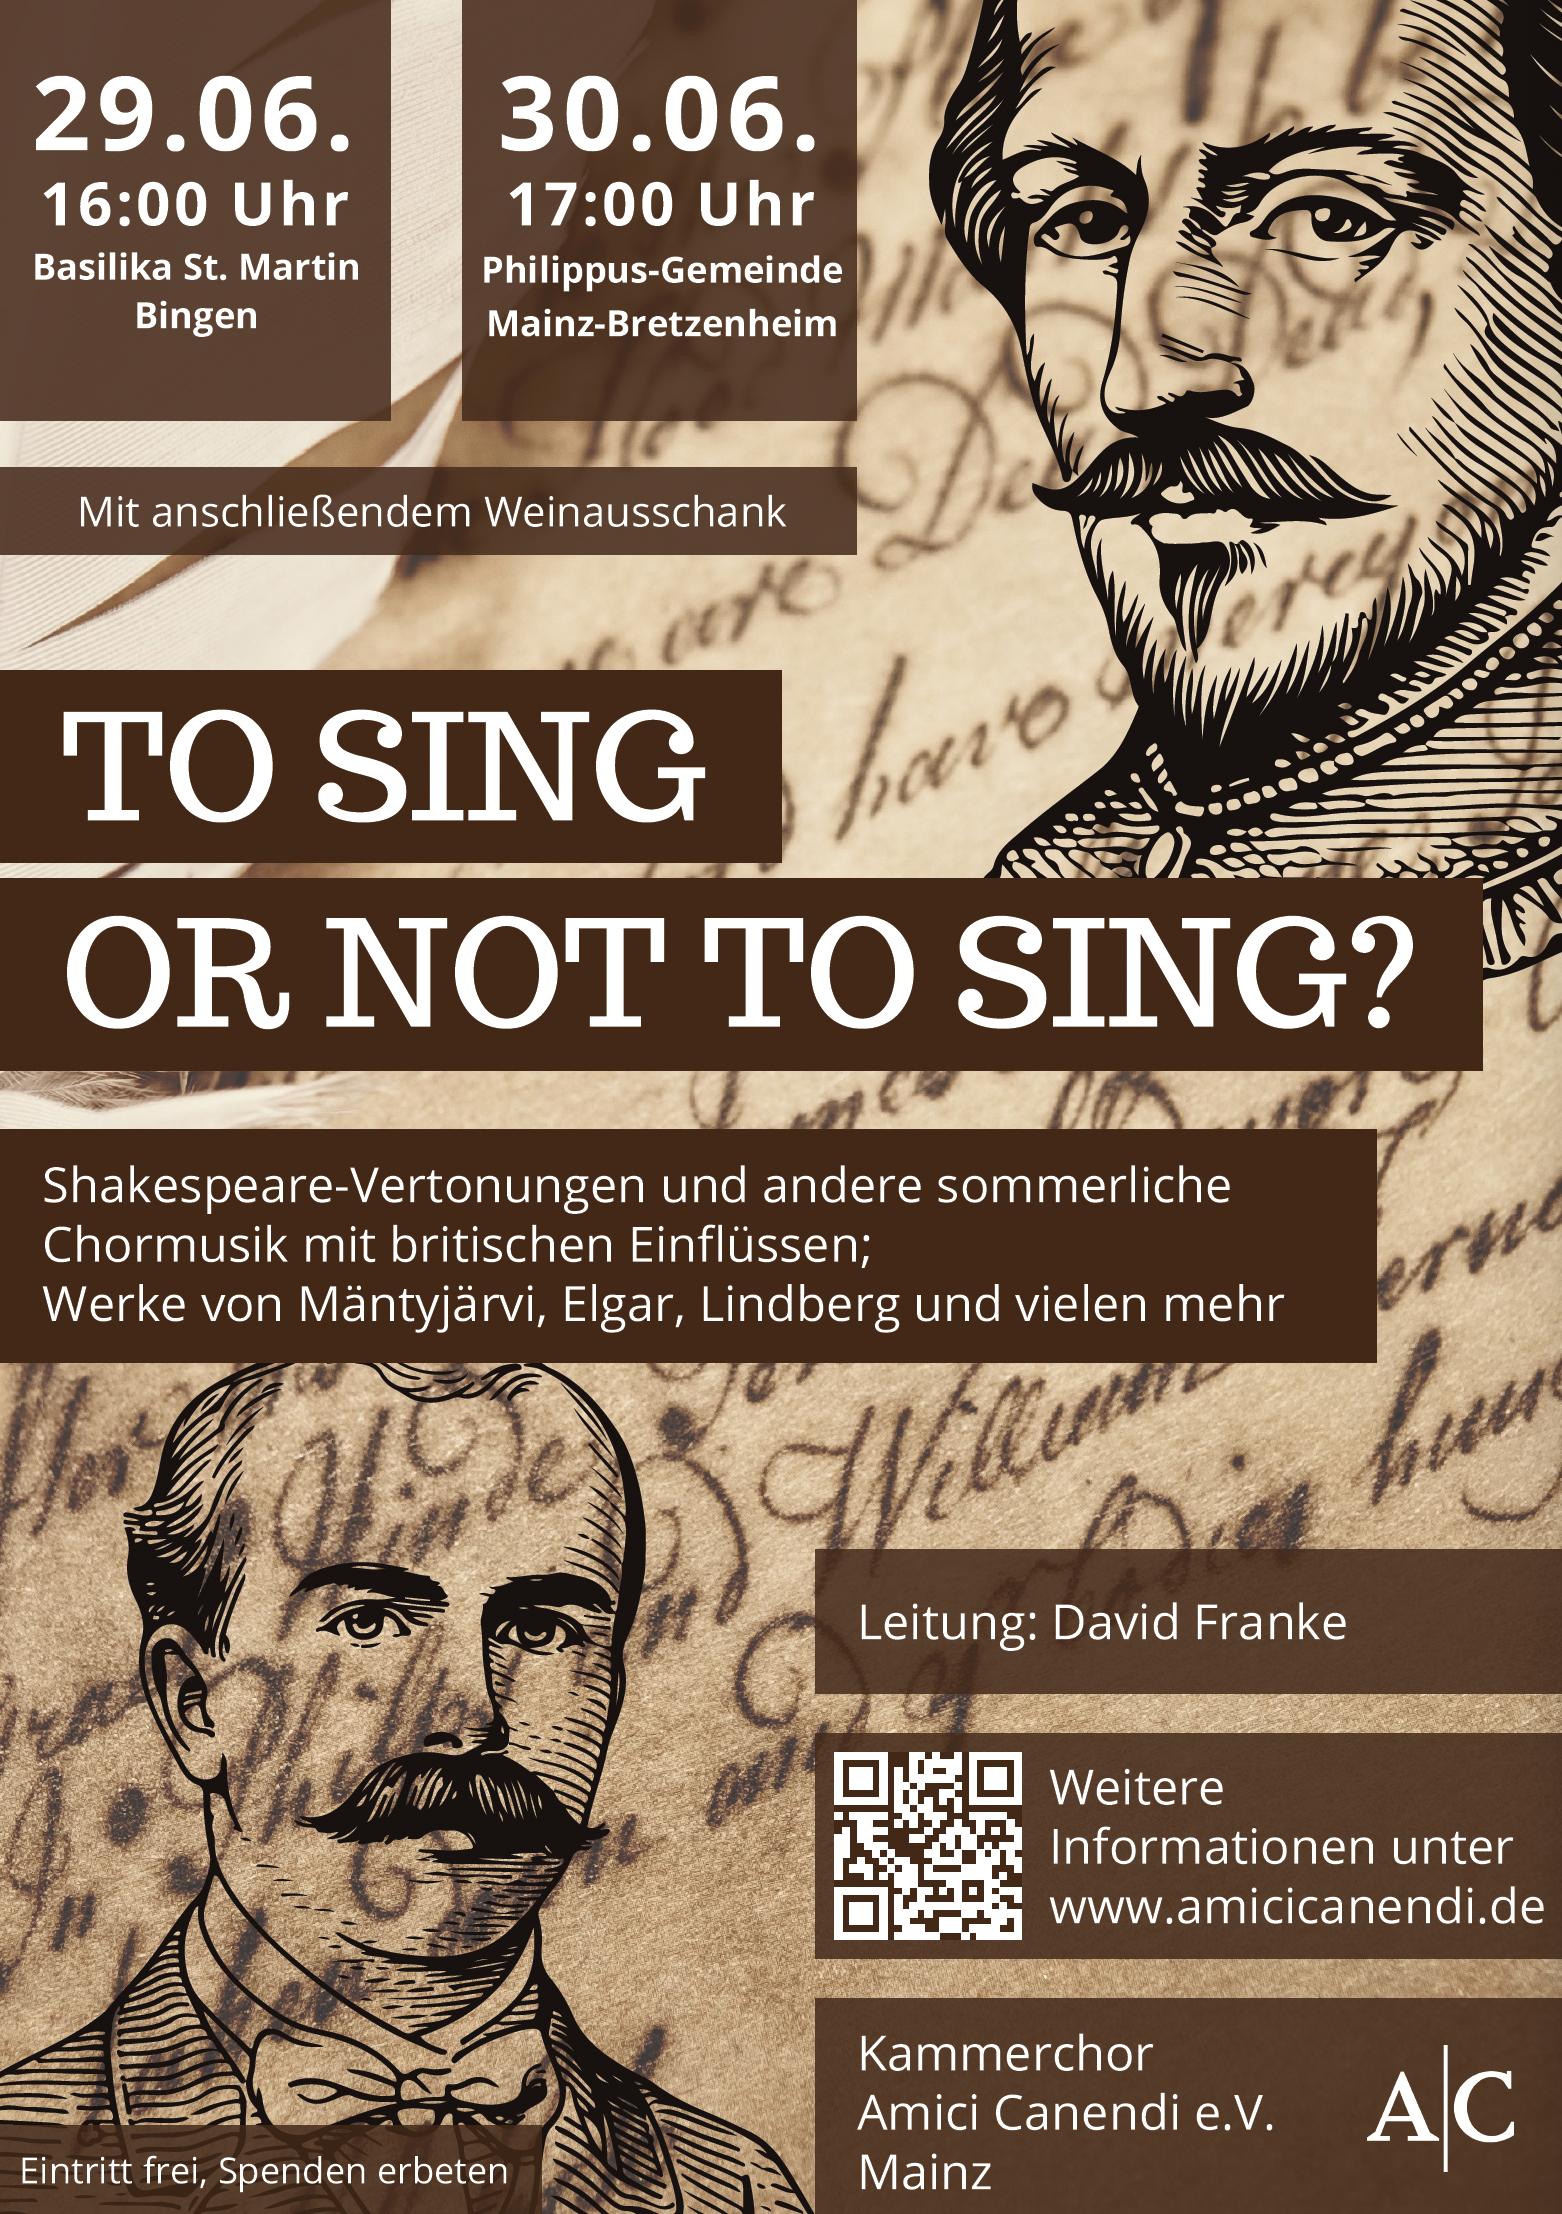 To sing or not to sing (c) Amici Canendi